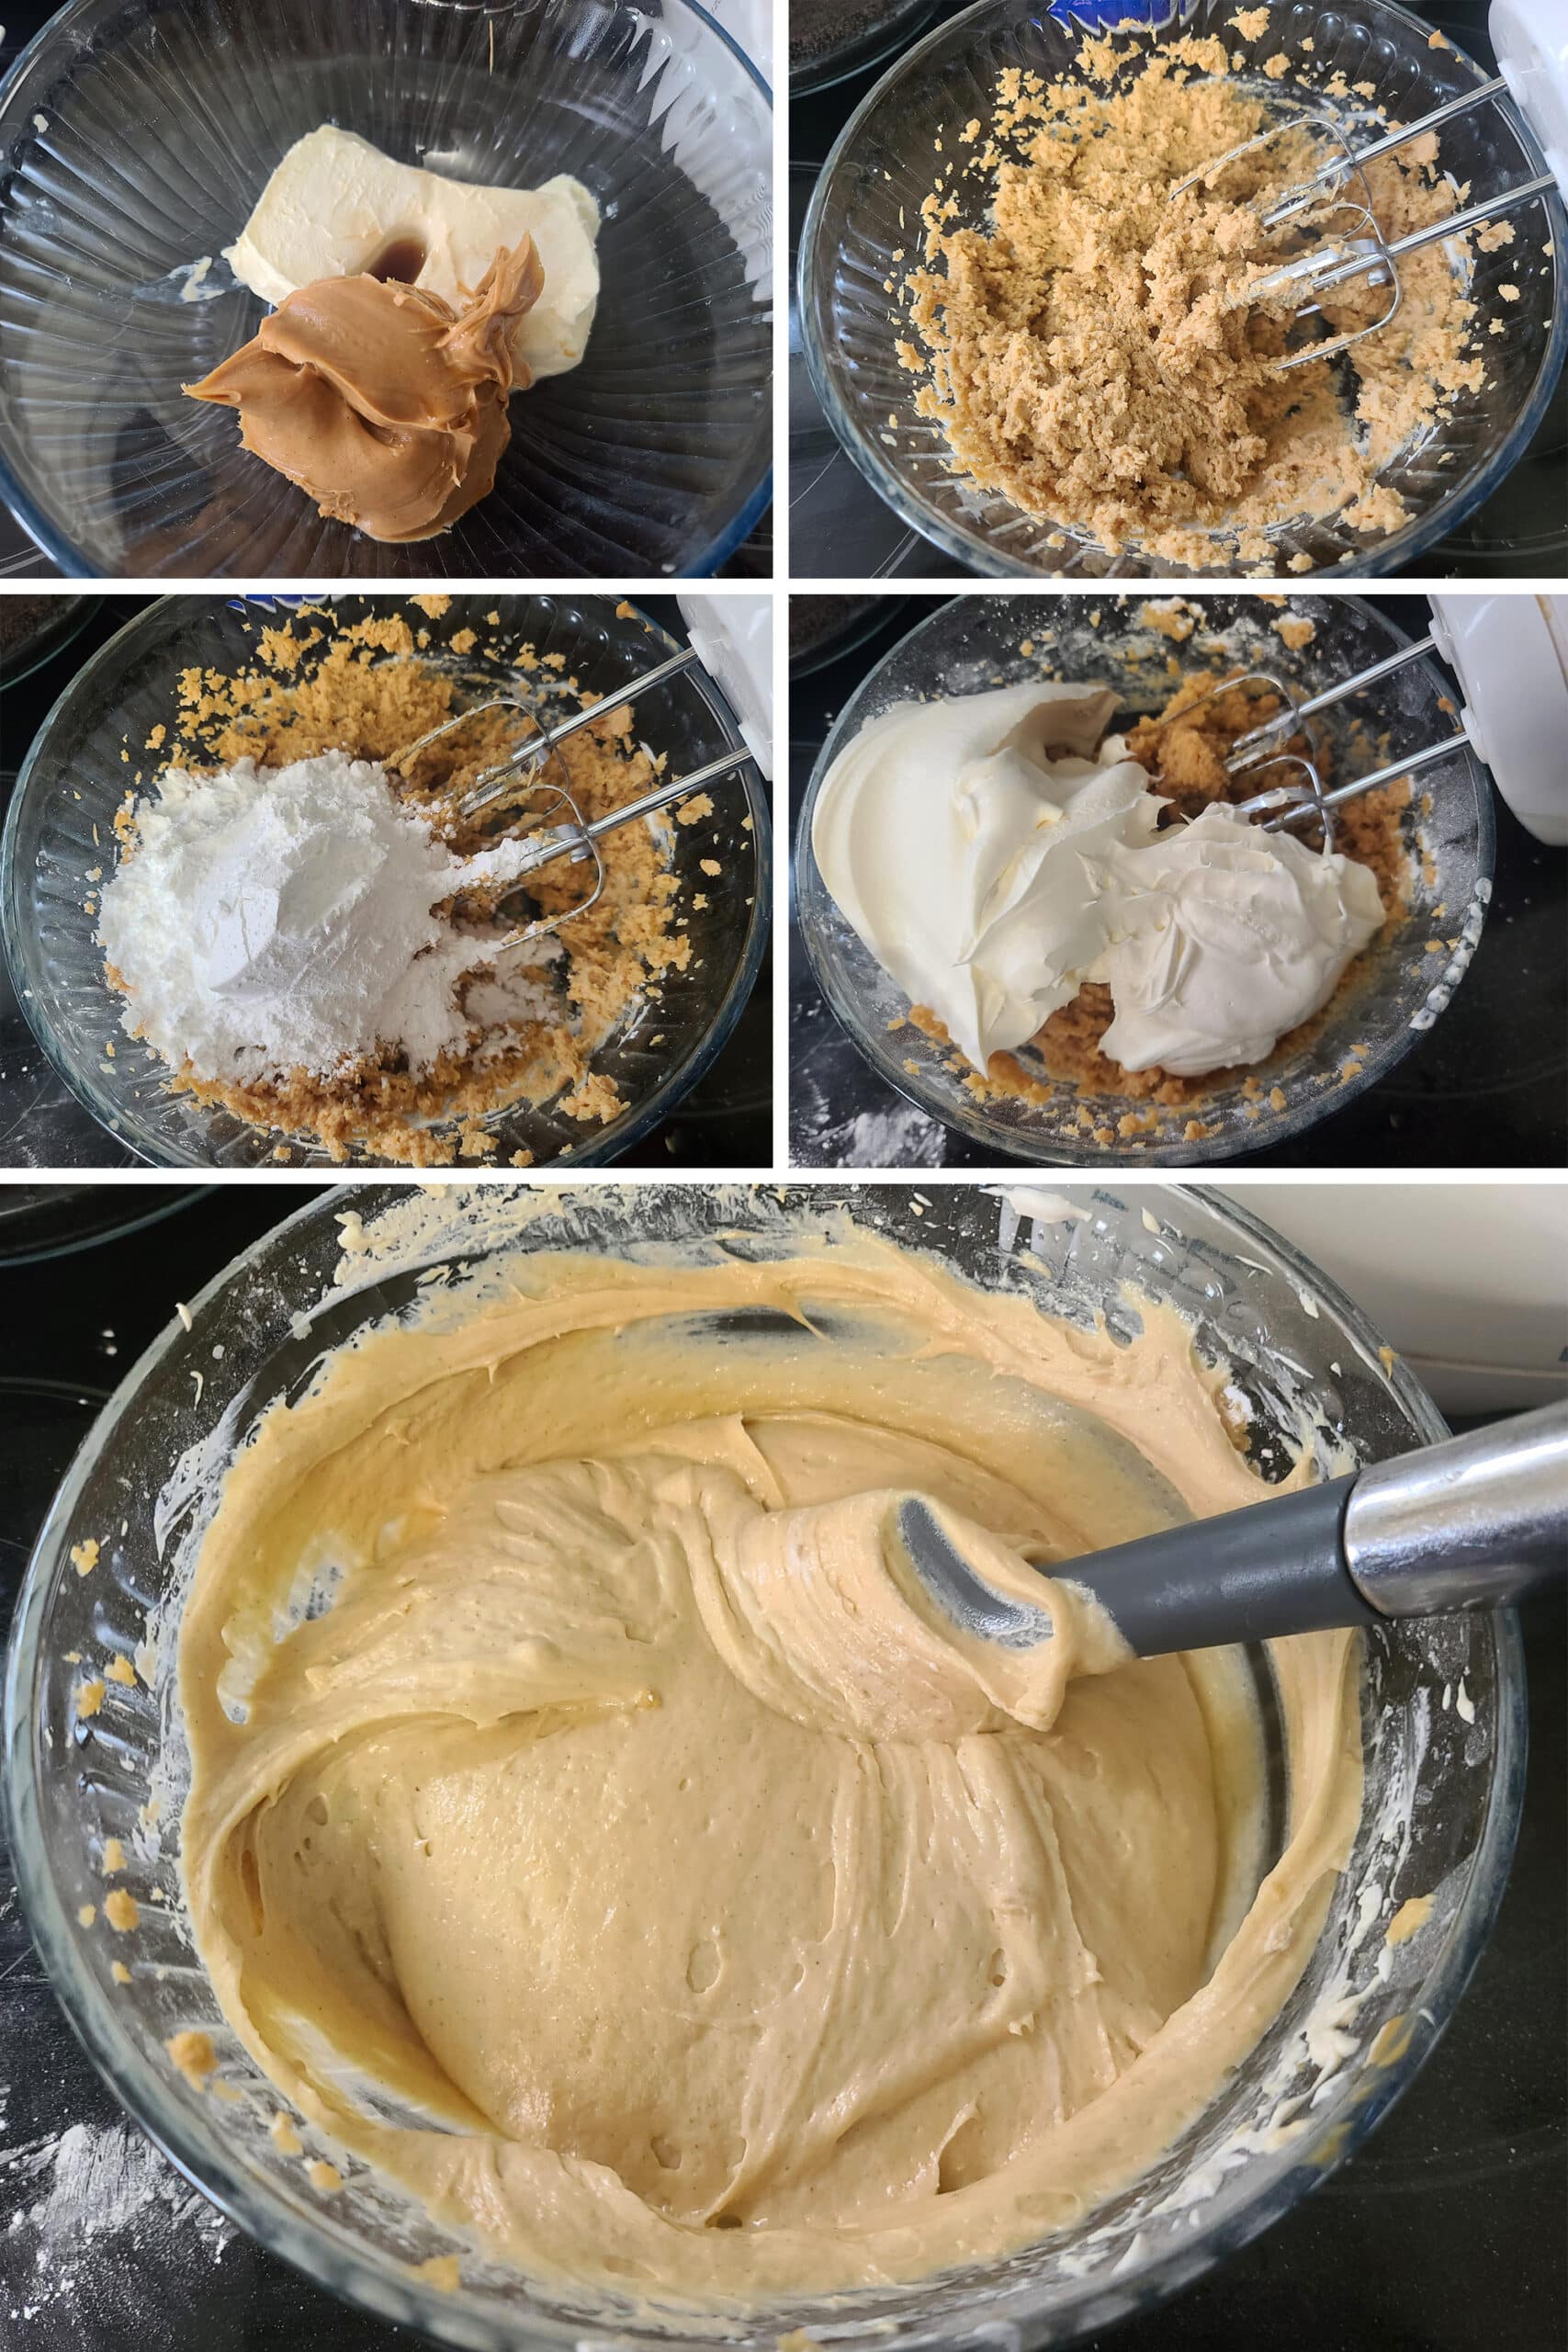 A 5 part image showing the peanut butter pie filling being mixed together in stages.